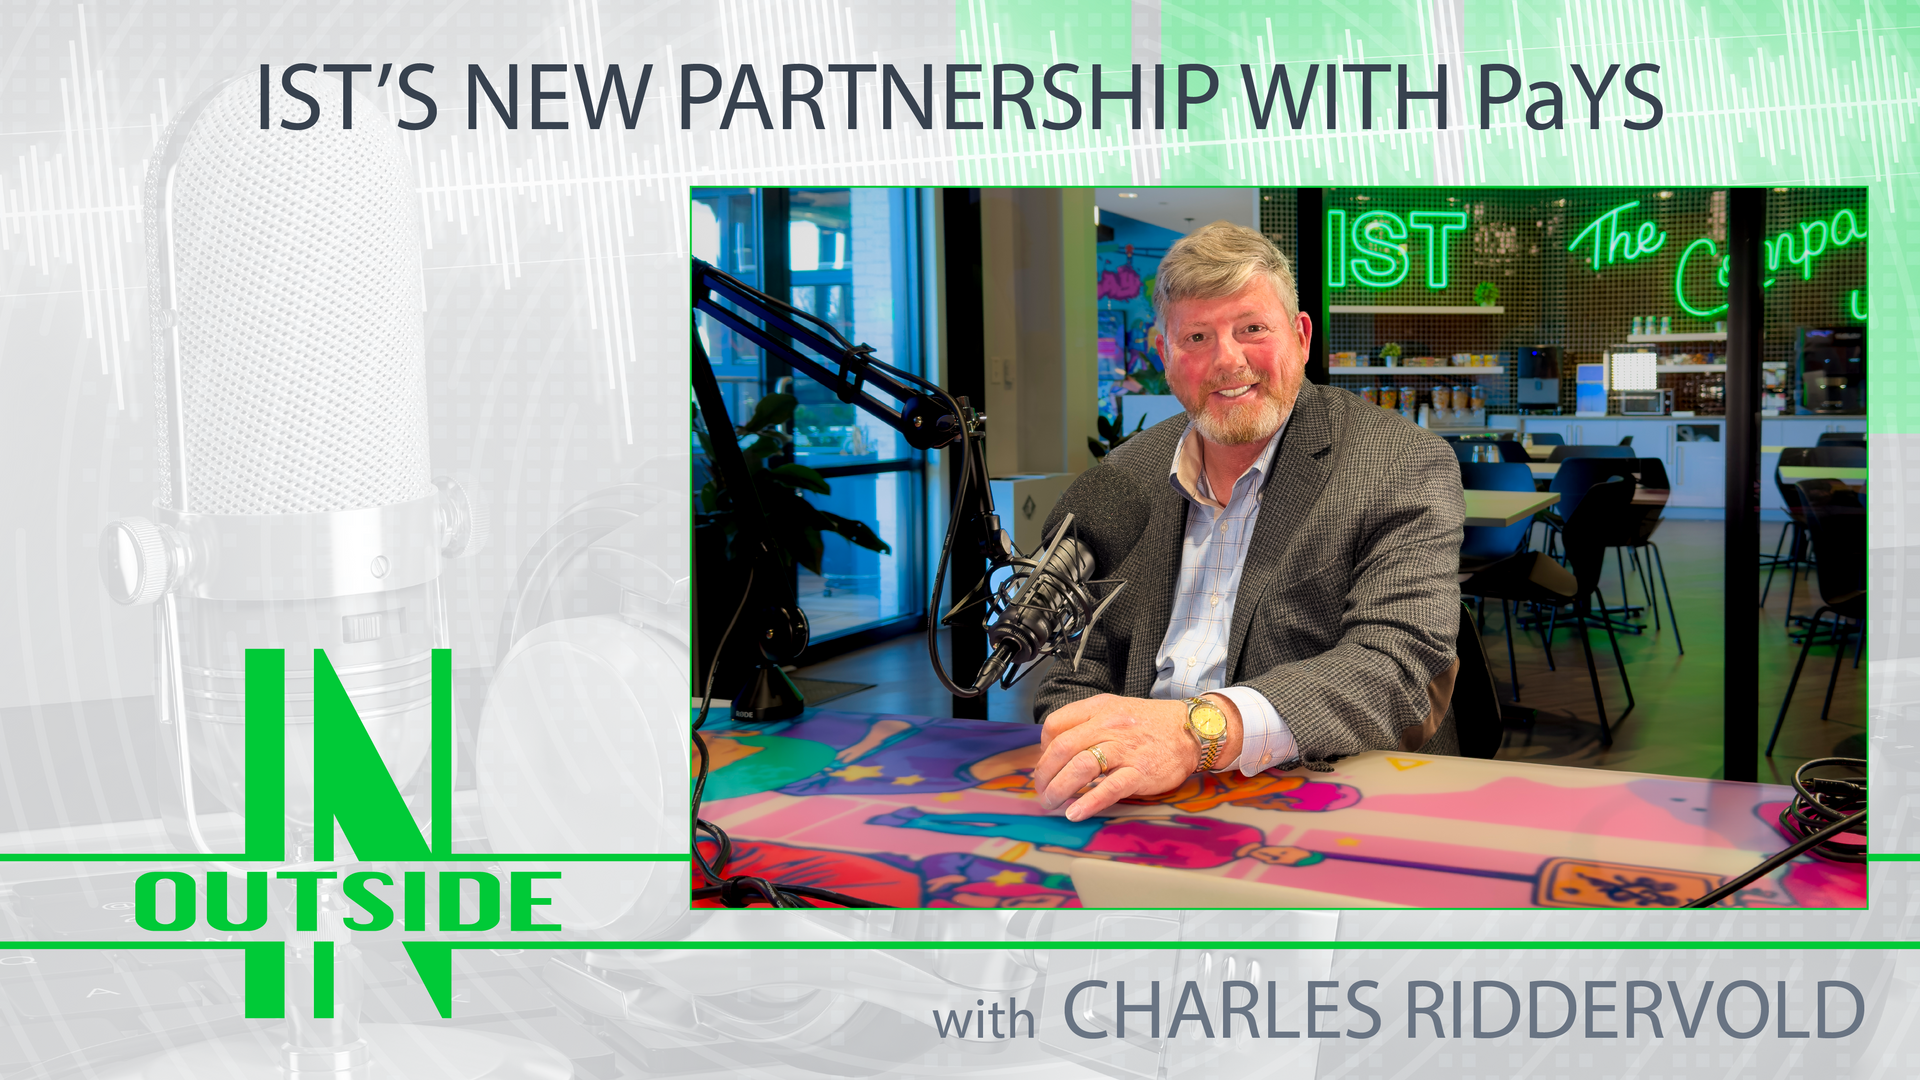 IST’s New Partnership with PaYS (Partnership for Your Success) with Charles Riddervold